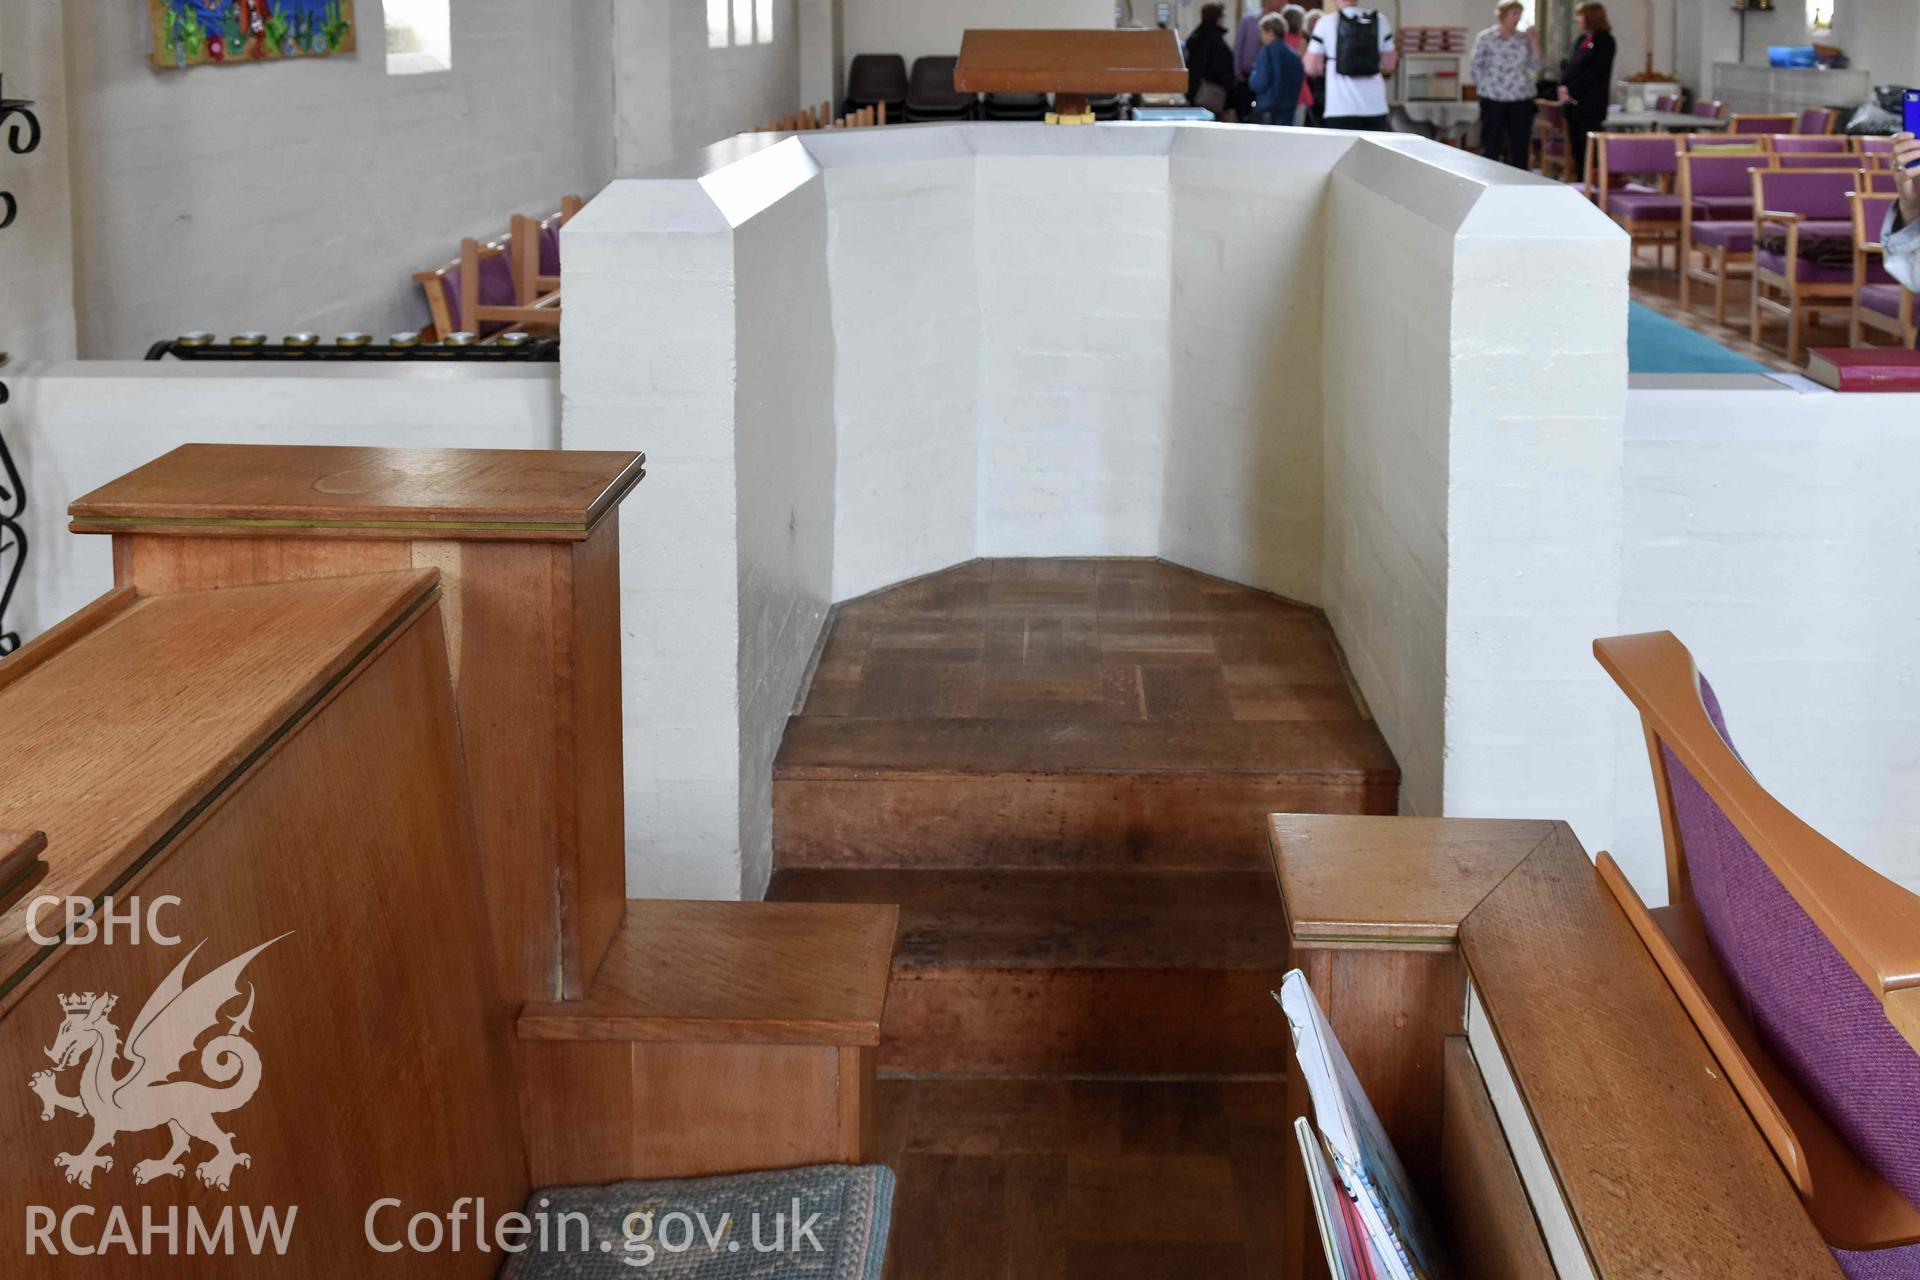 St Peter's Church, right-hand pulpit/reading desk from altar.